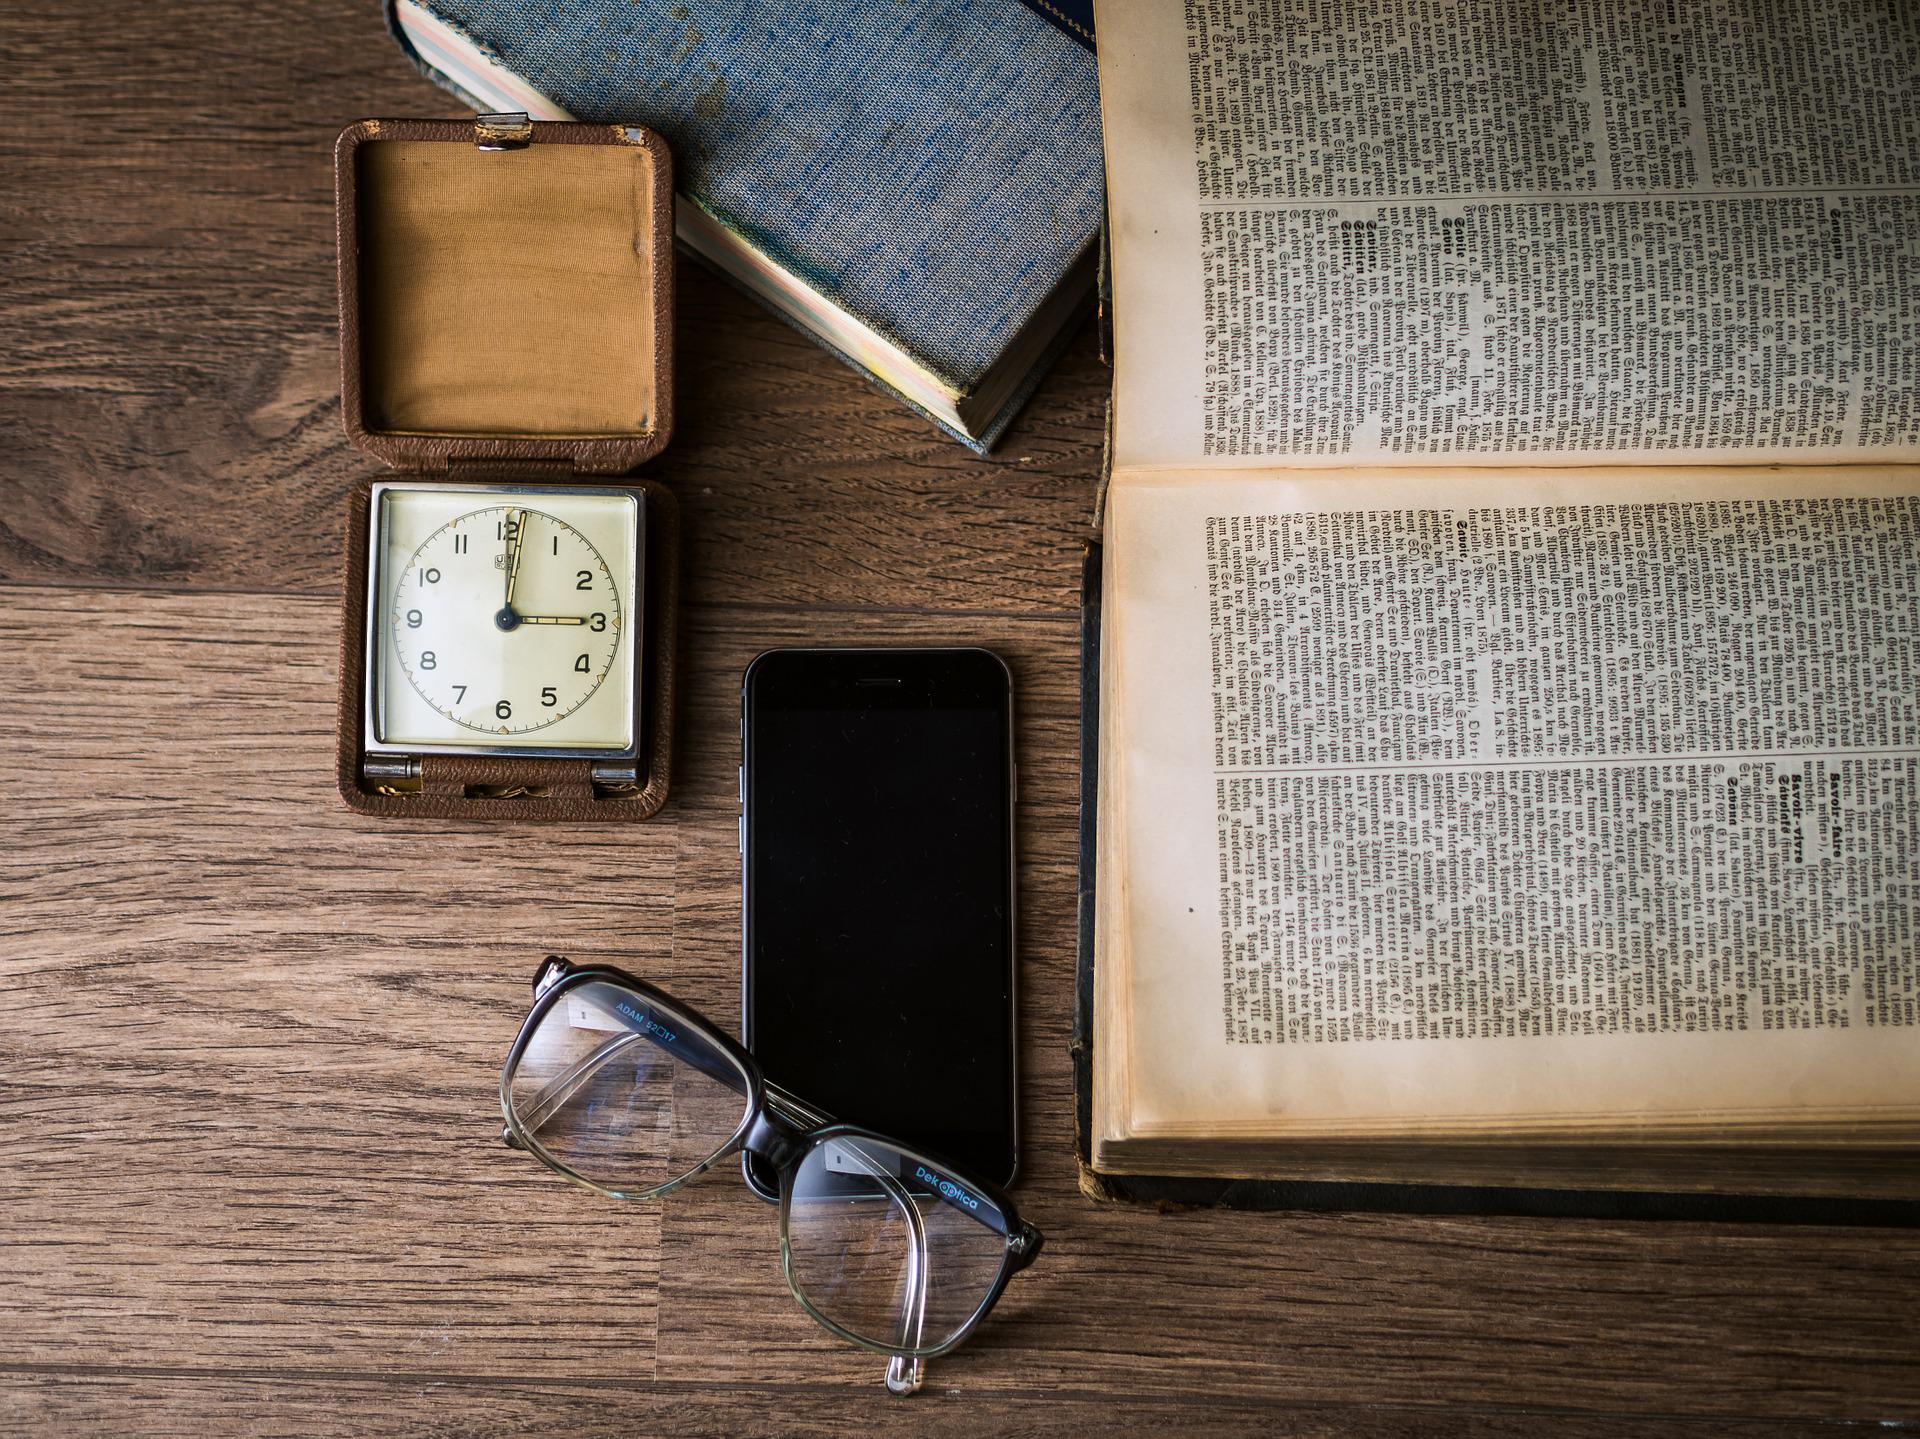 Stock photo of an open bible next to a phone, glasses, and pocketwatch